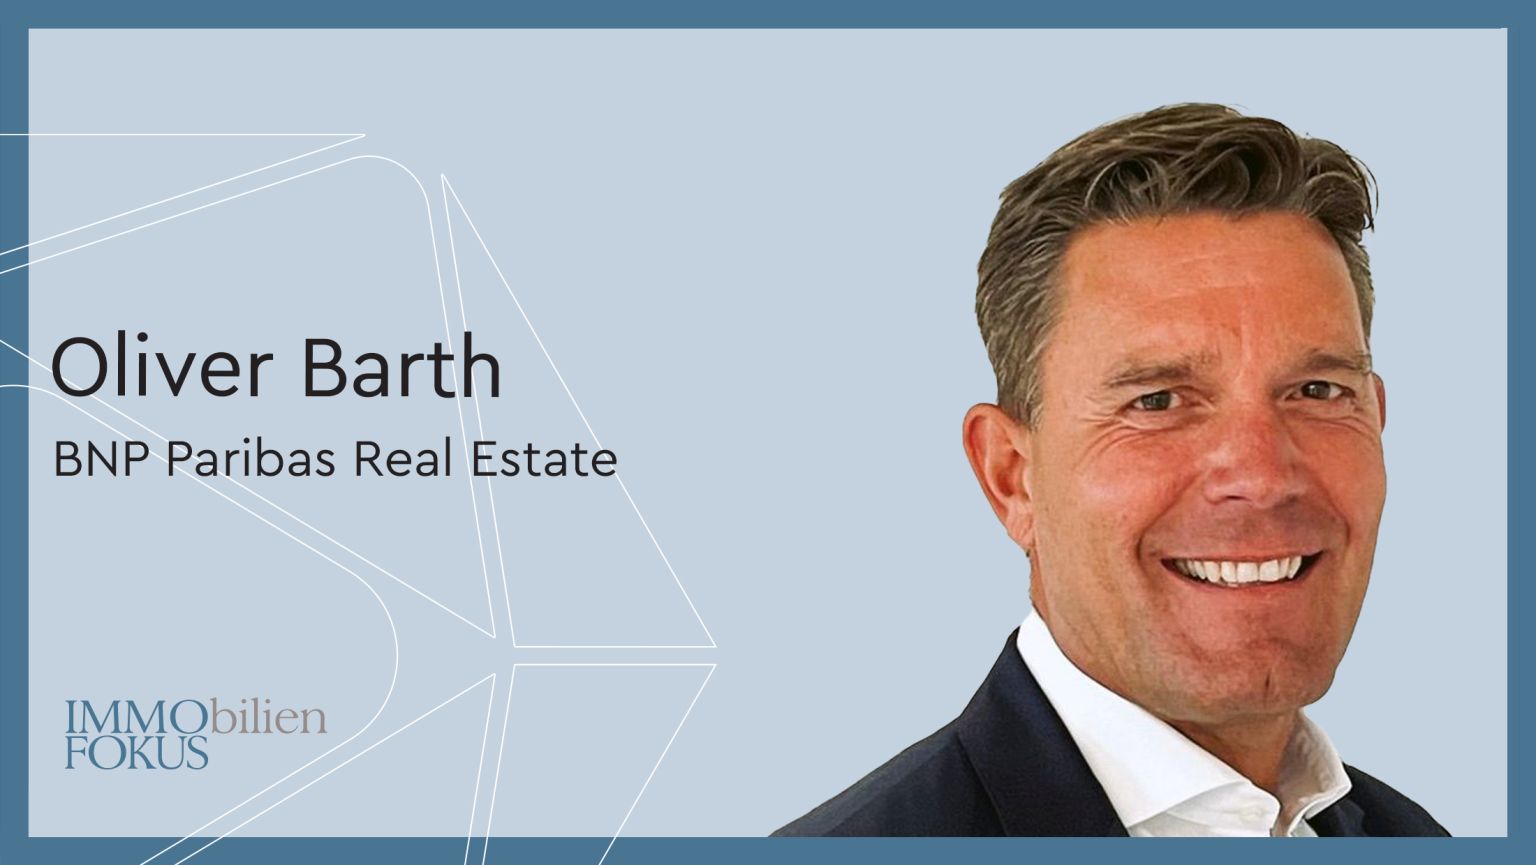 Oliver Barth wird Head of Office Advisory bei BNP Paribas Real Estate